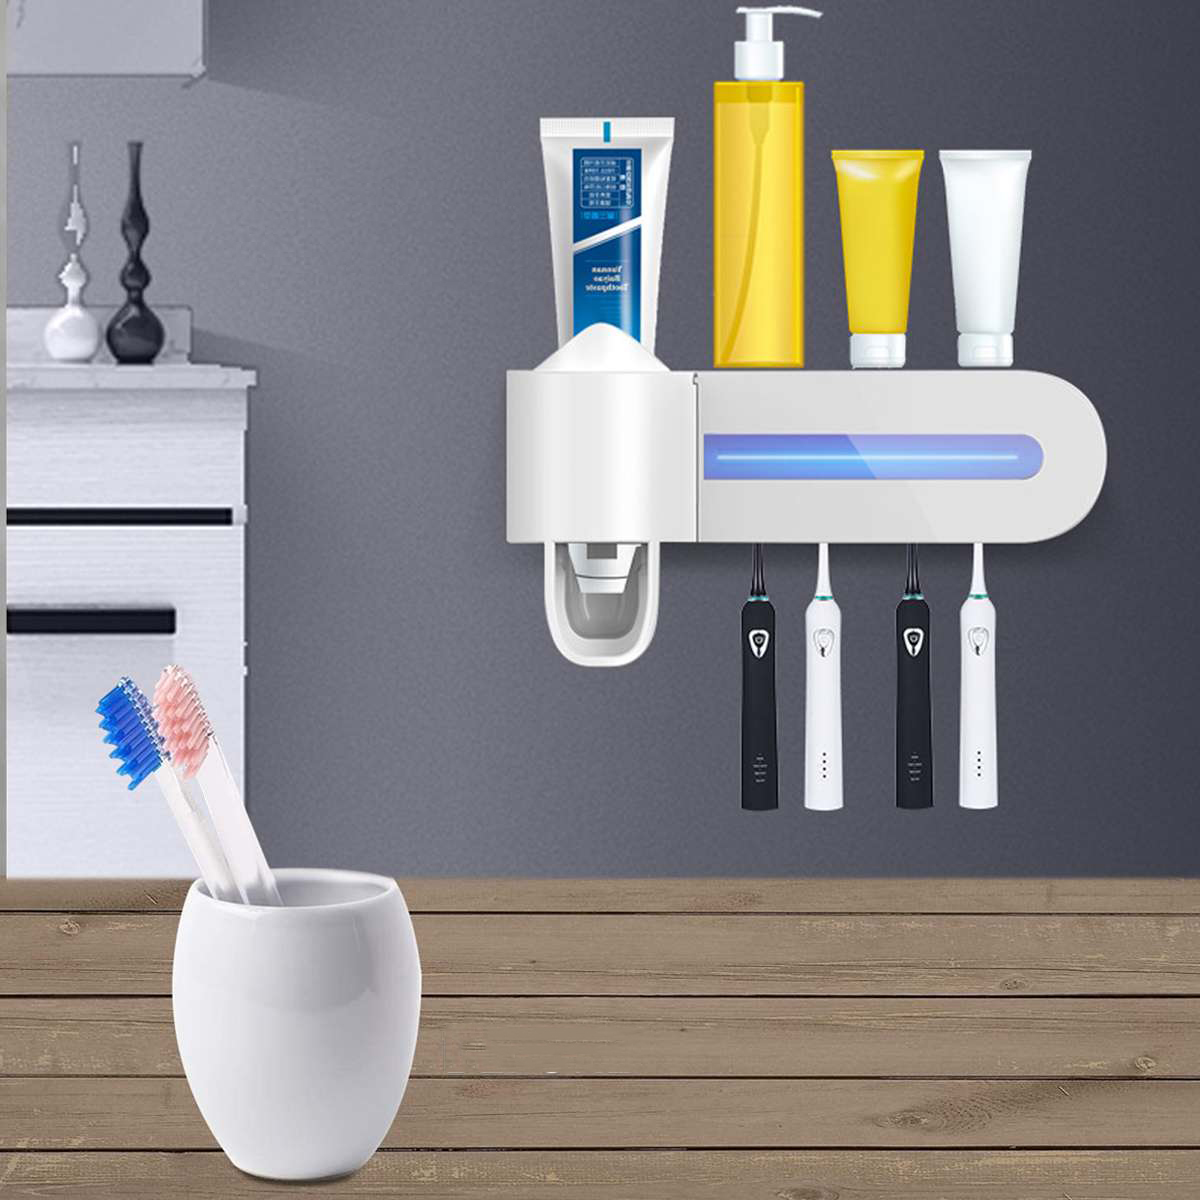 UV Toothbrush Holder 4 Slot Toothpaste Dispenser Toothbrush Storage Box Wall Mount Home Cleaner Sterilize Bathroom Accessories